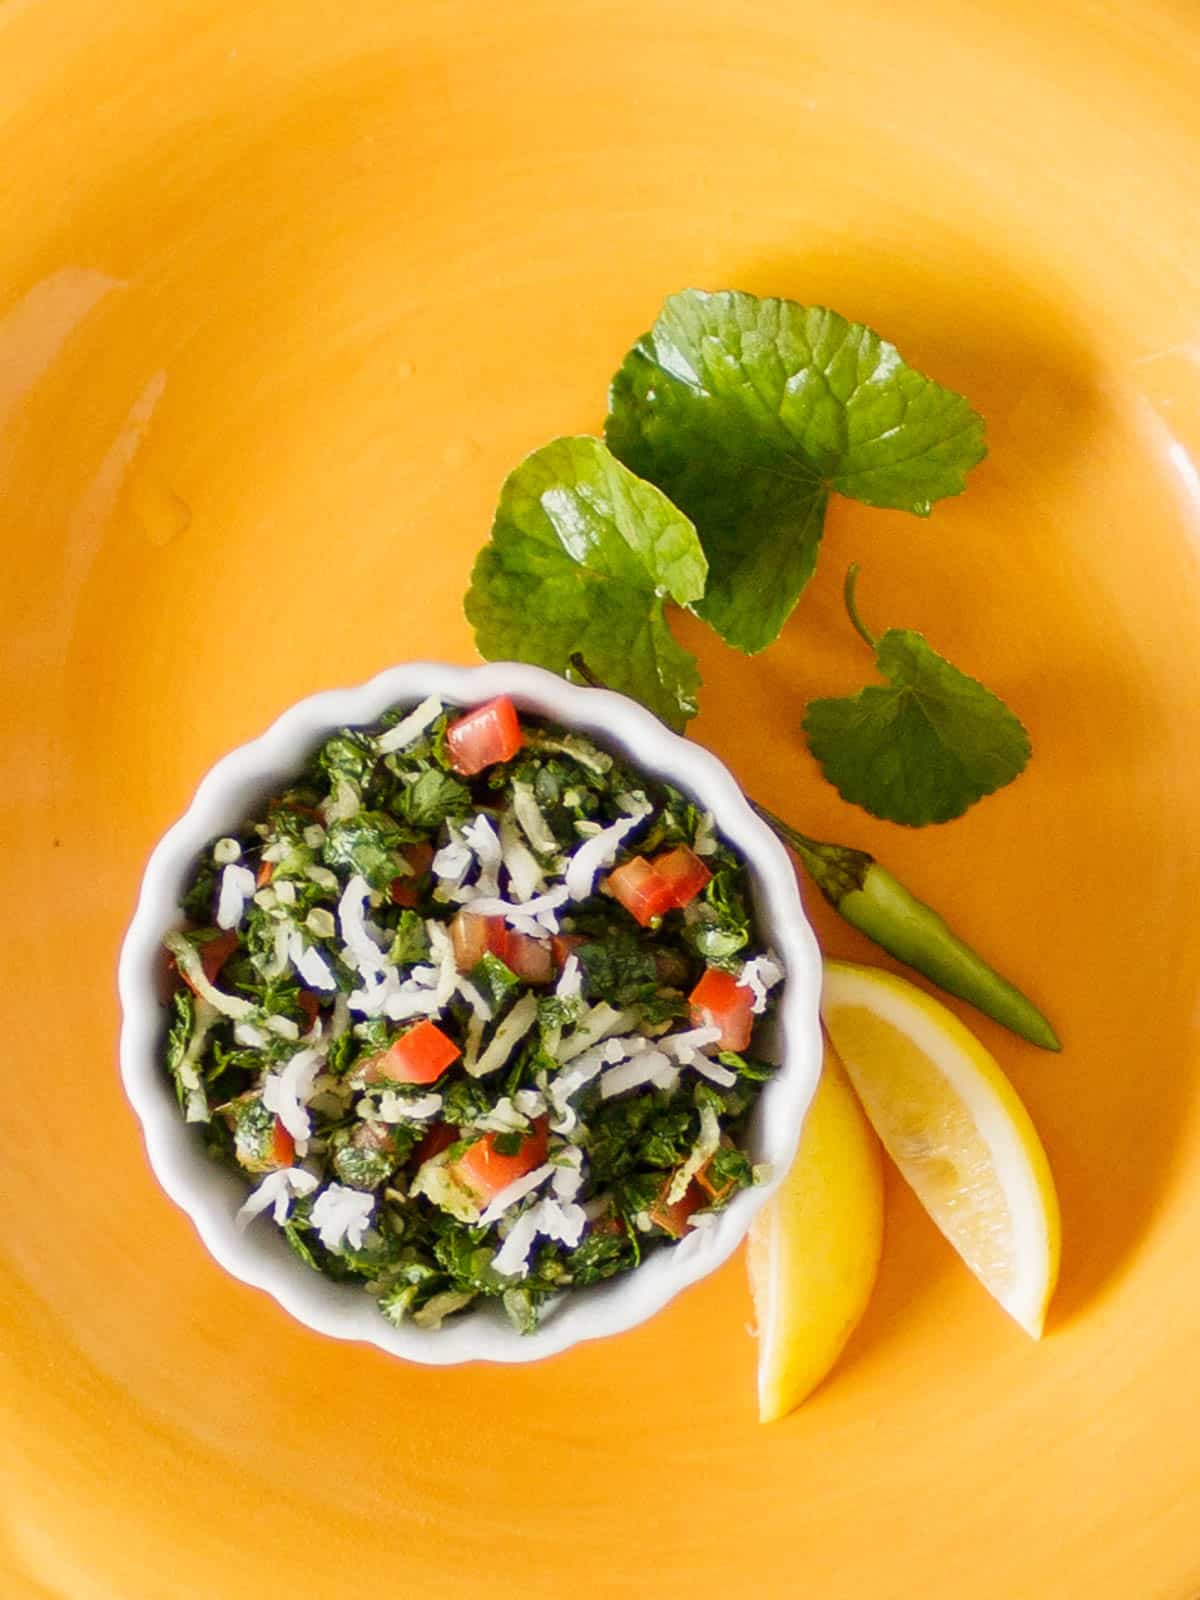 Small bowl of Indian pennywort salad with lemon and green chili on the side.